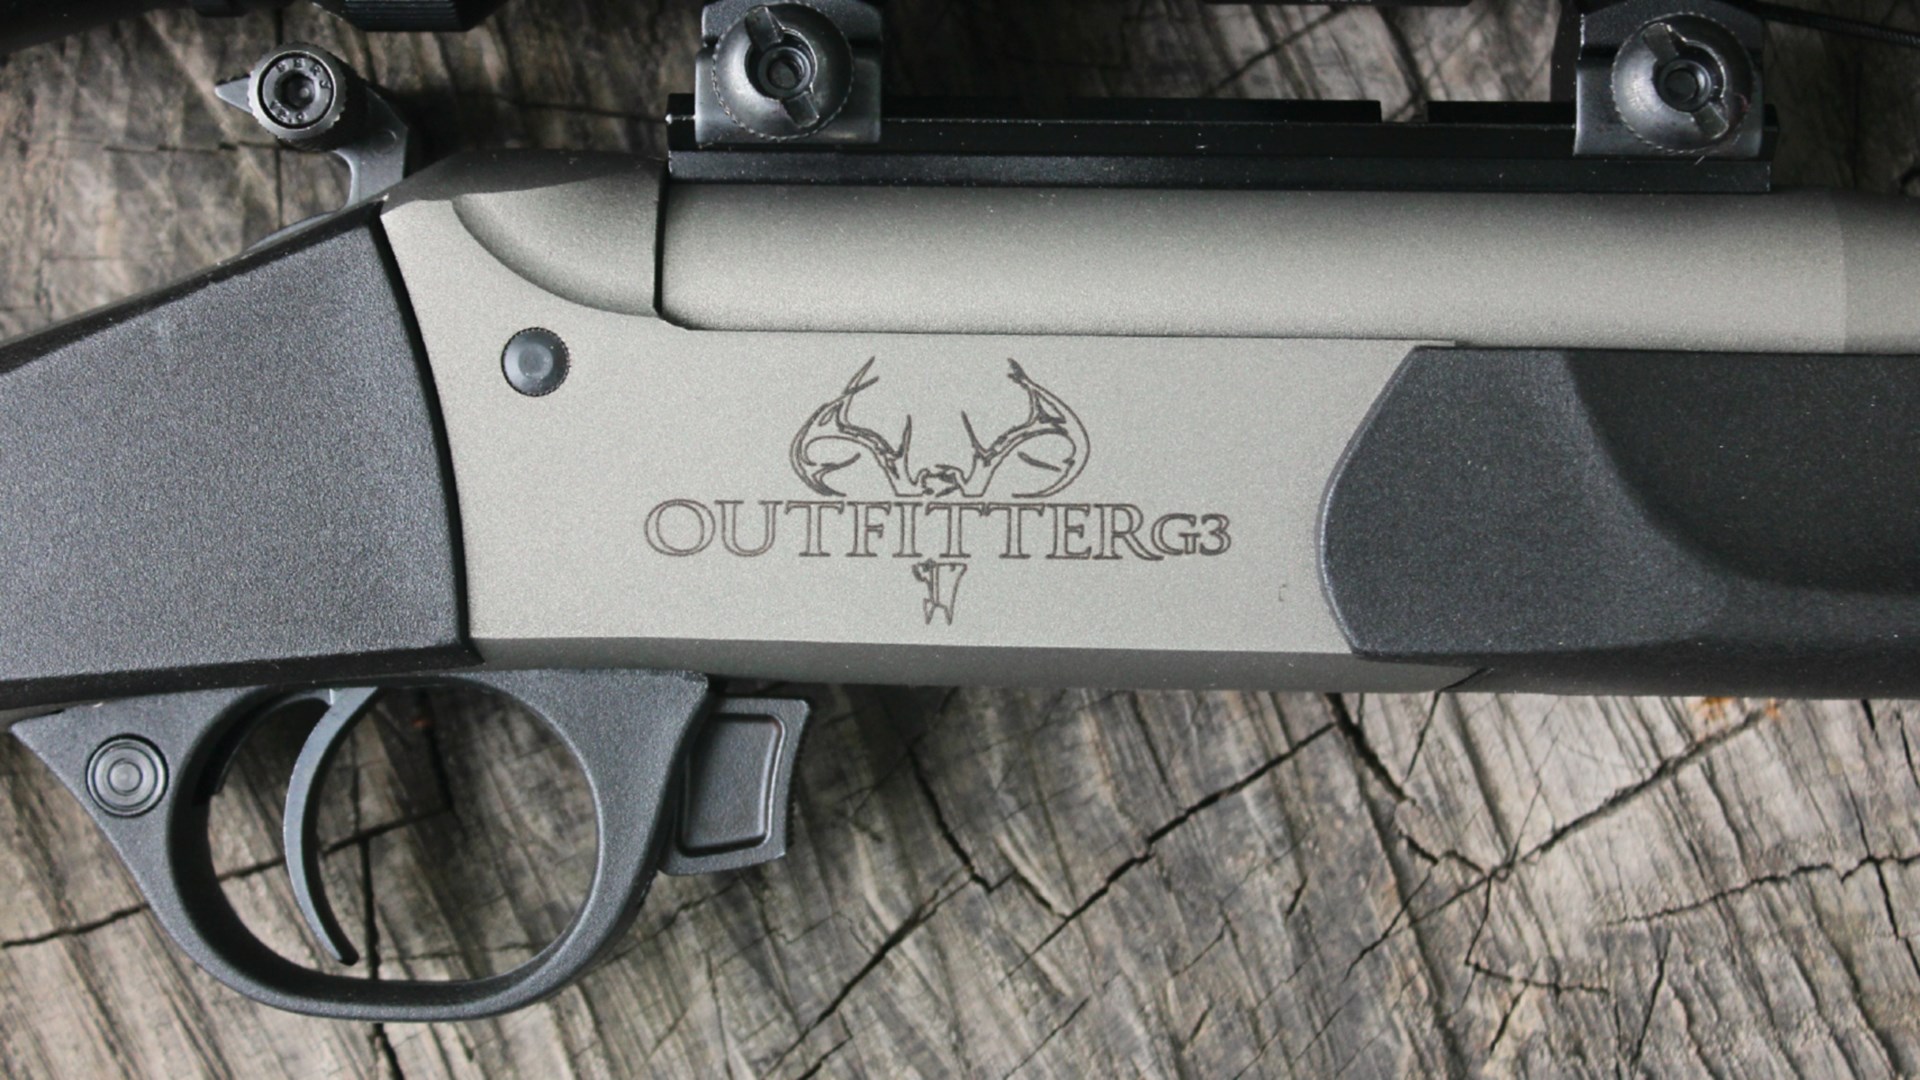 Traditions Outfitter G3 single-shot rifle .300 BLK black plastic stock cerakote silver colored barreled action closeup showing right-side markings deer skull engraving text